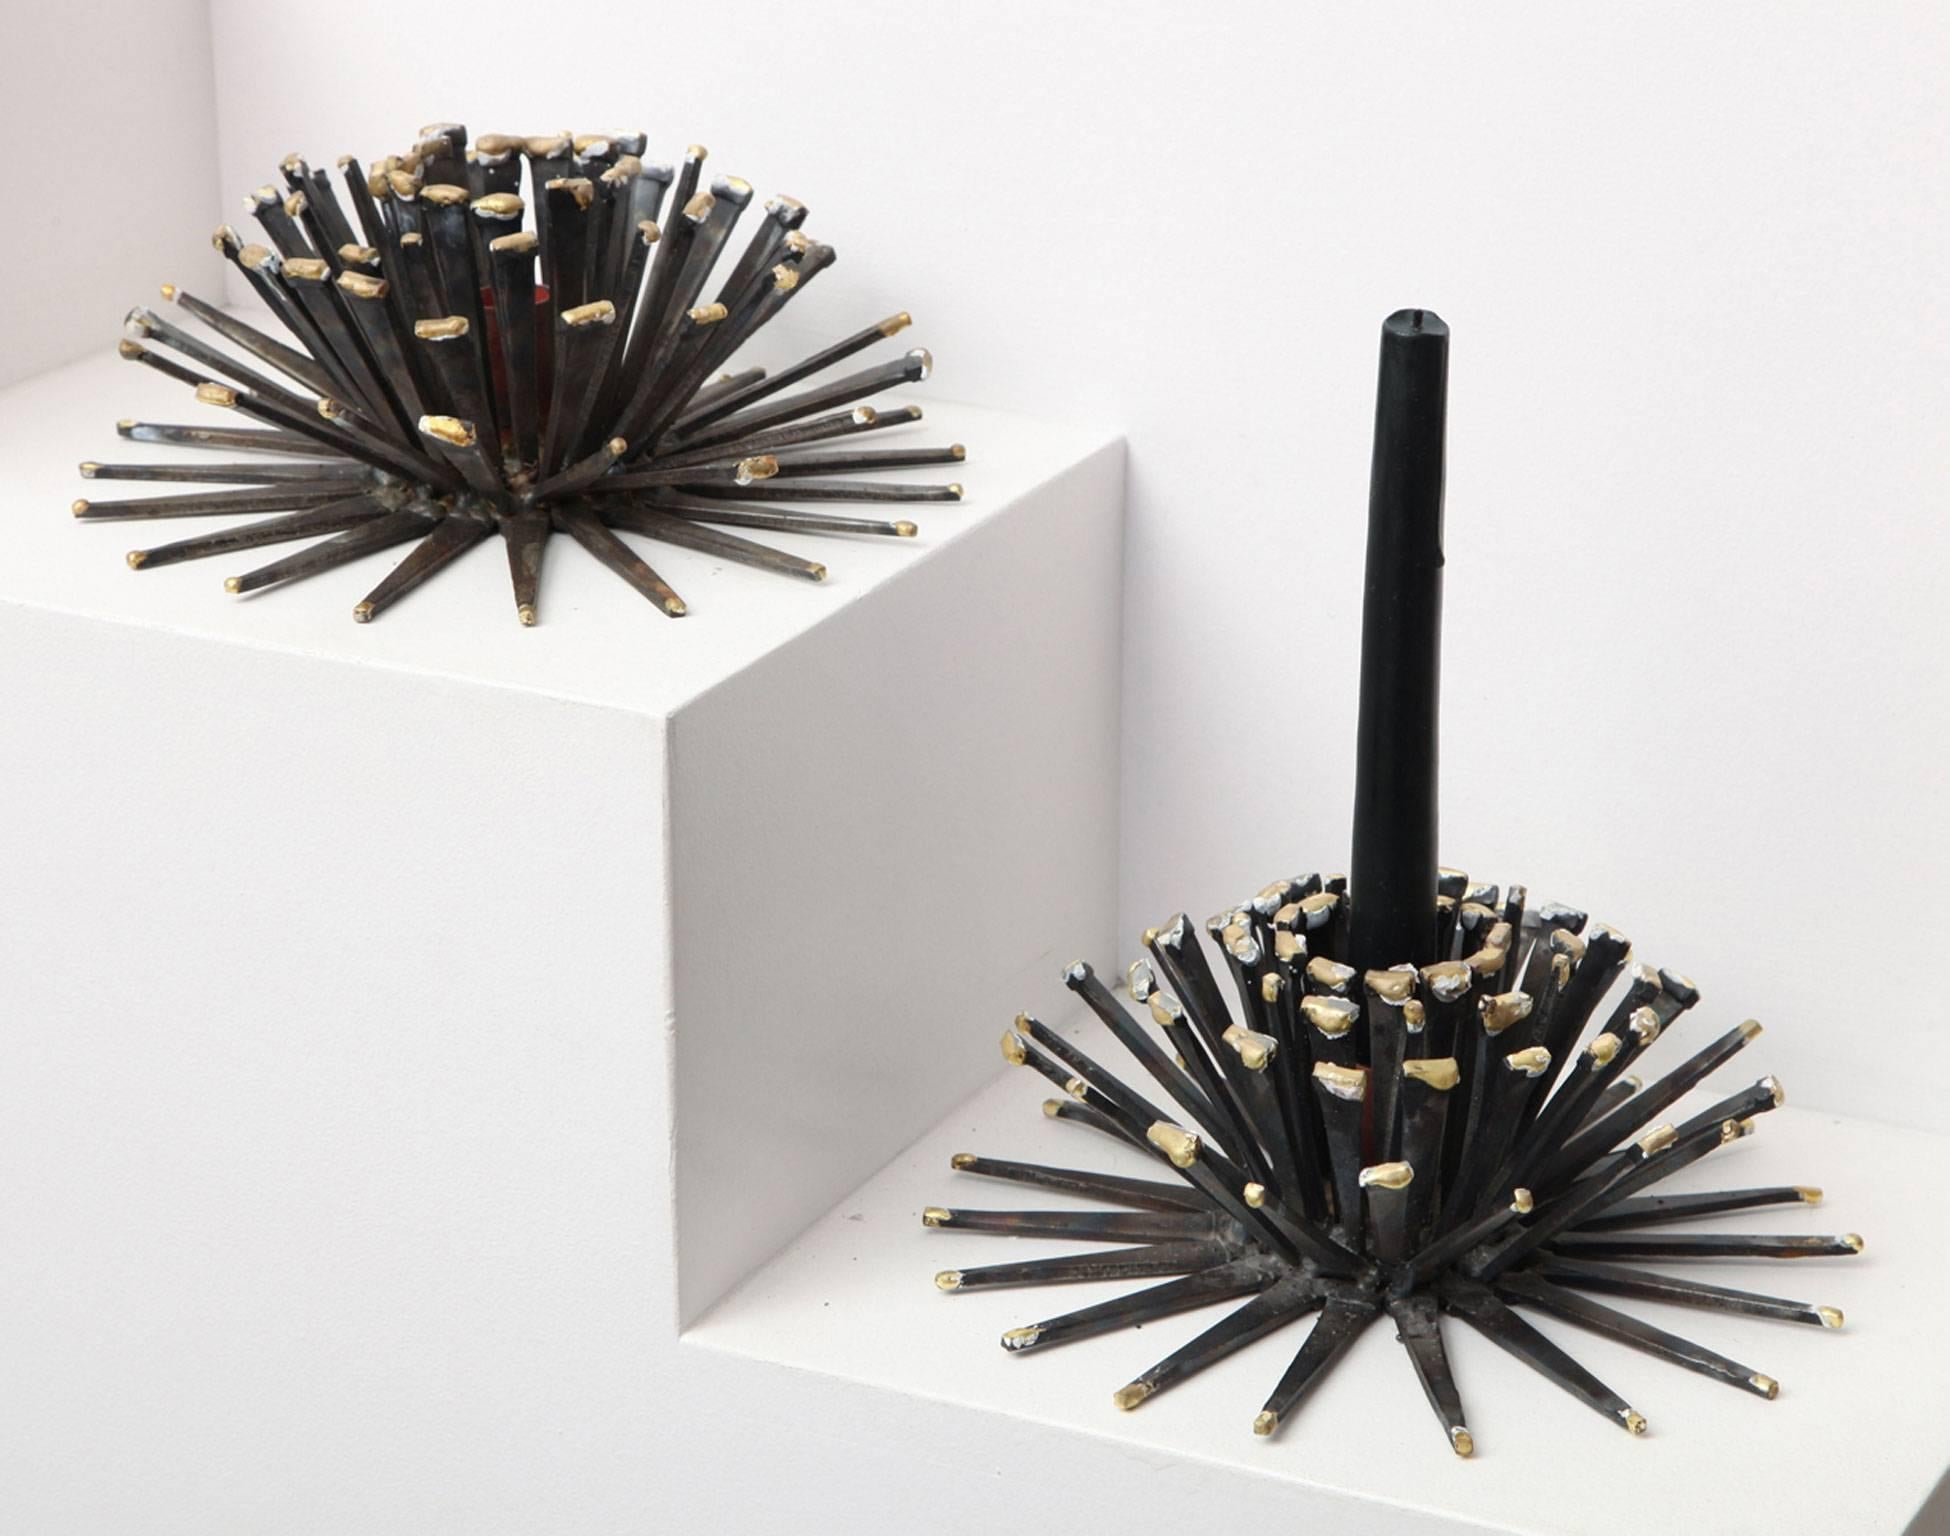 Made expressly for Liz O'Brien by Marie Suri, these anemone candleholders are handcrafted in steel with bronze decoration and a copper interior.
Festive for holiday tables and parties, these holders take a standard tapering candles. They are also